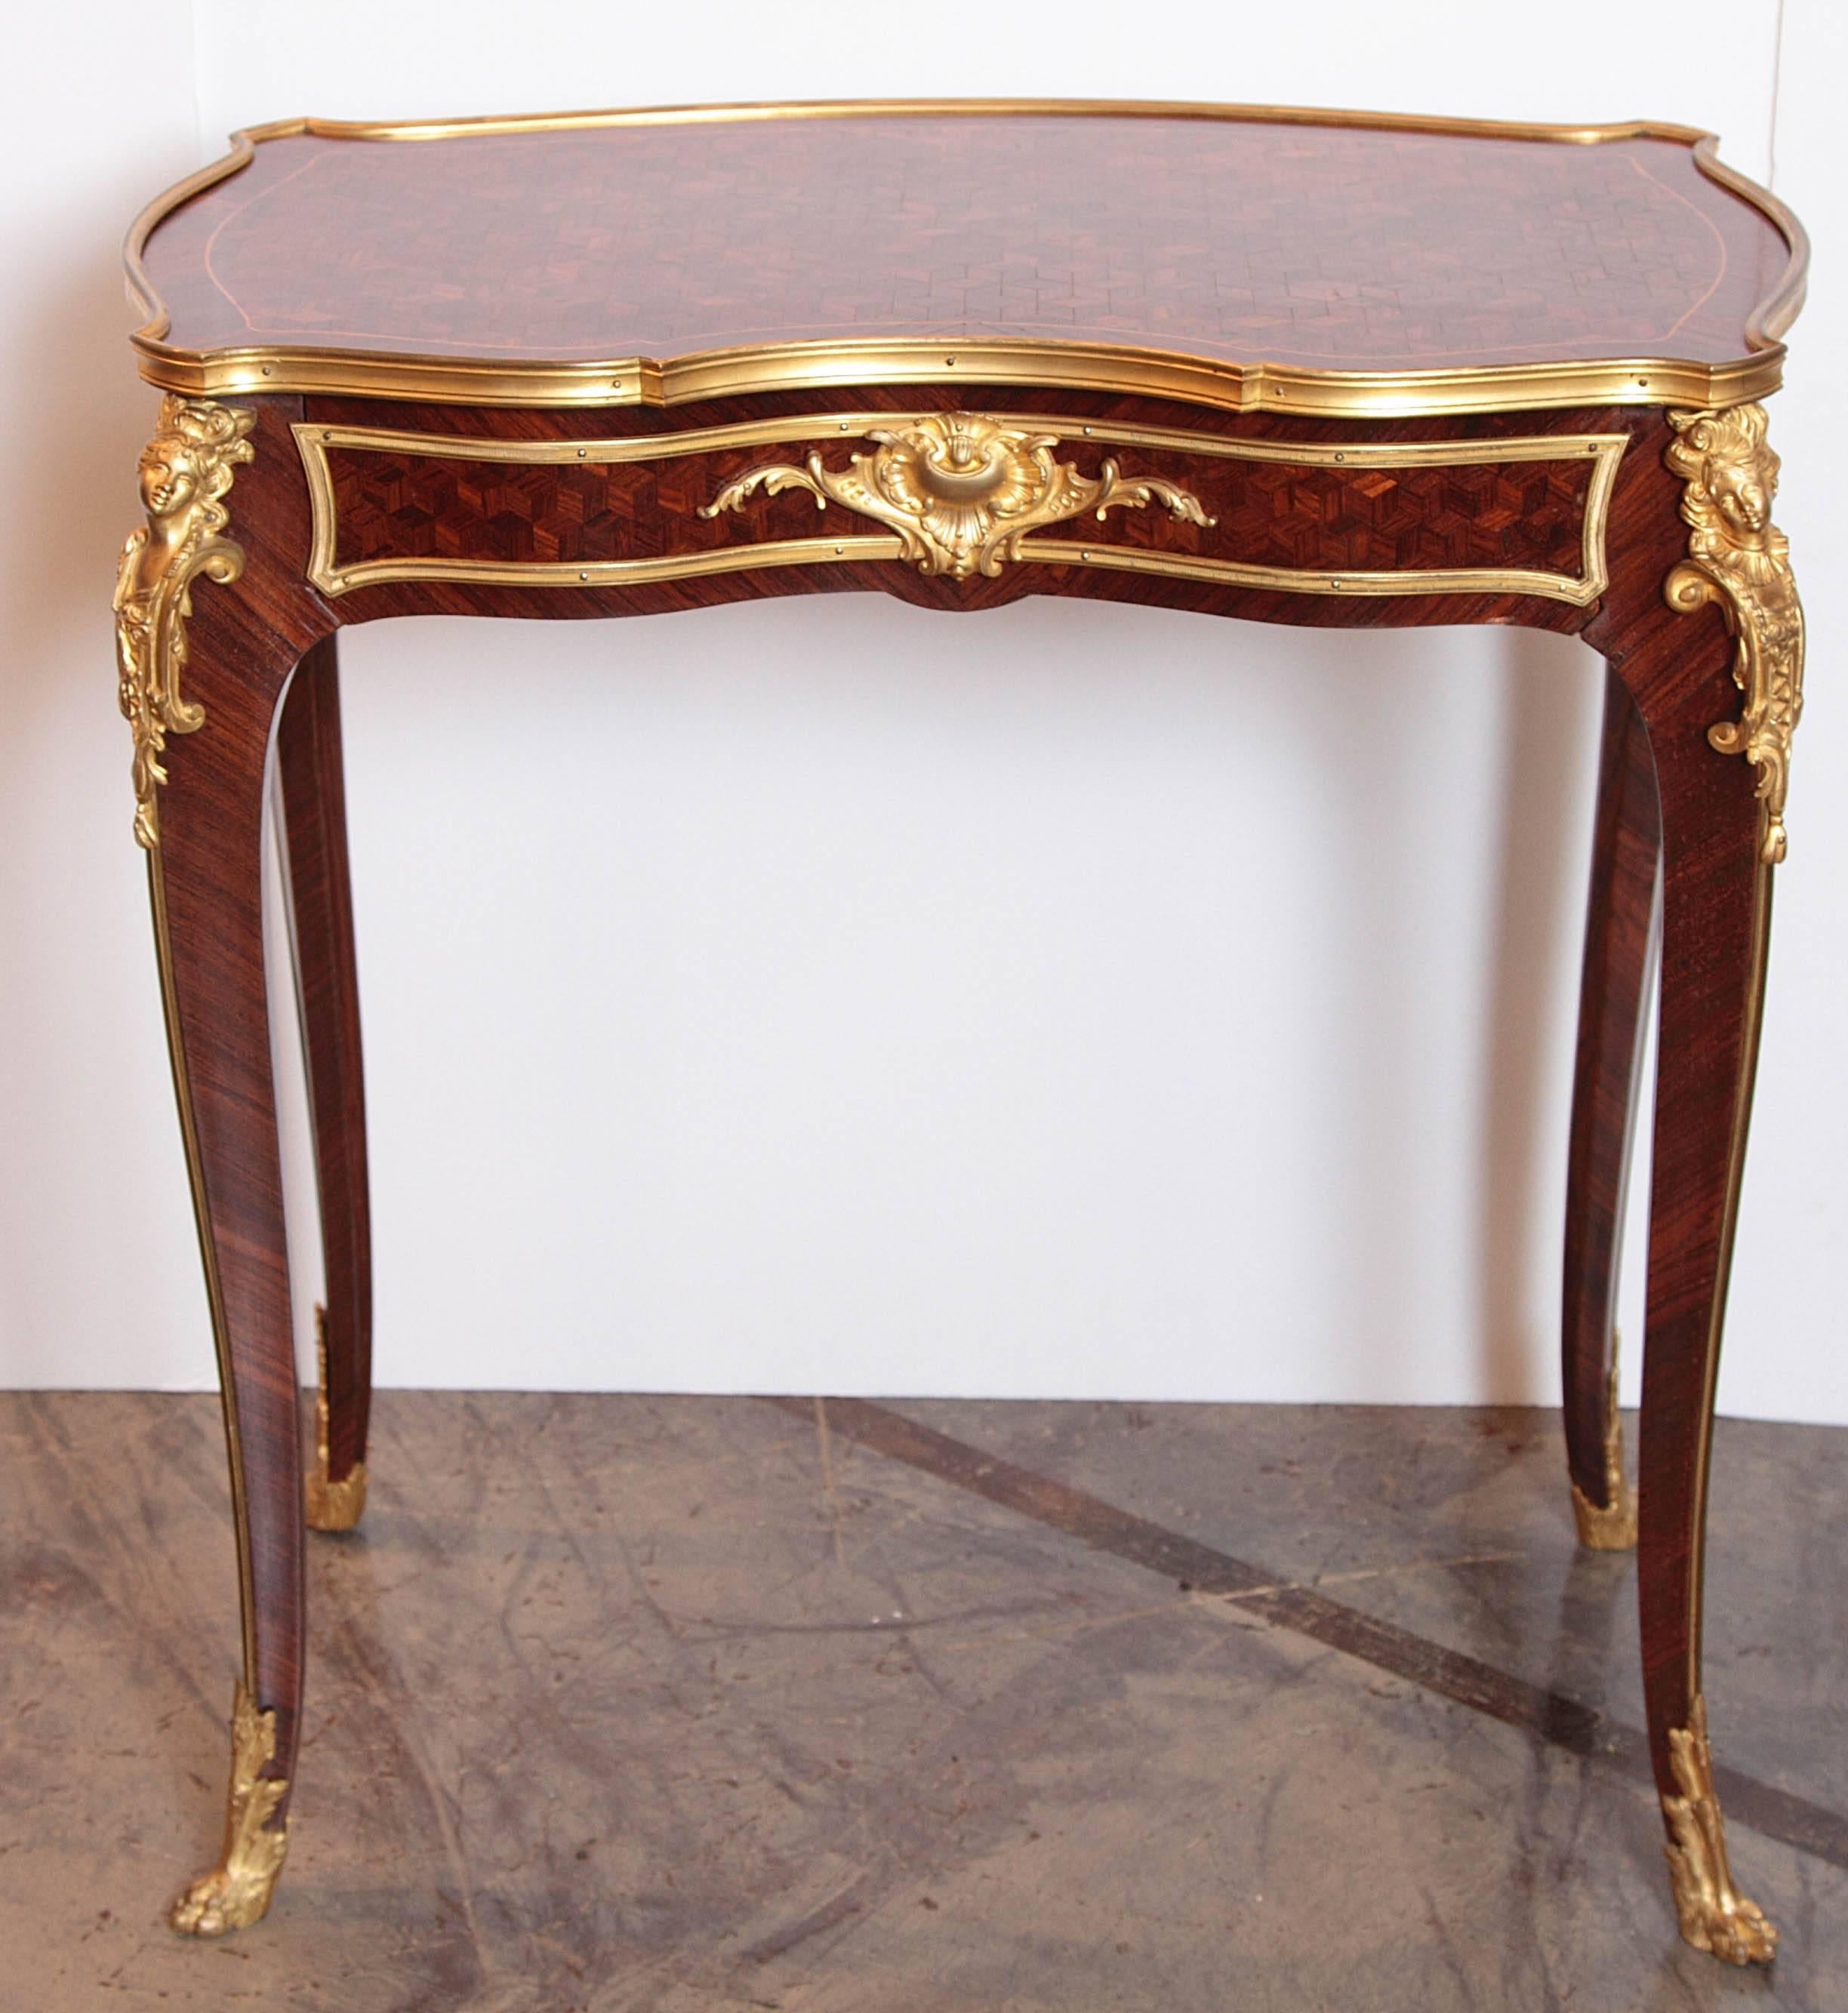 19th century fine side table by P Sormani. Gilt bronze figural chutes and pawed feet. Parquetry top single drawer.